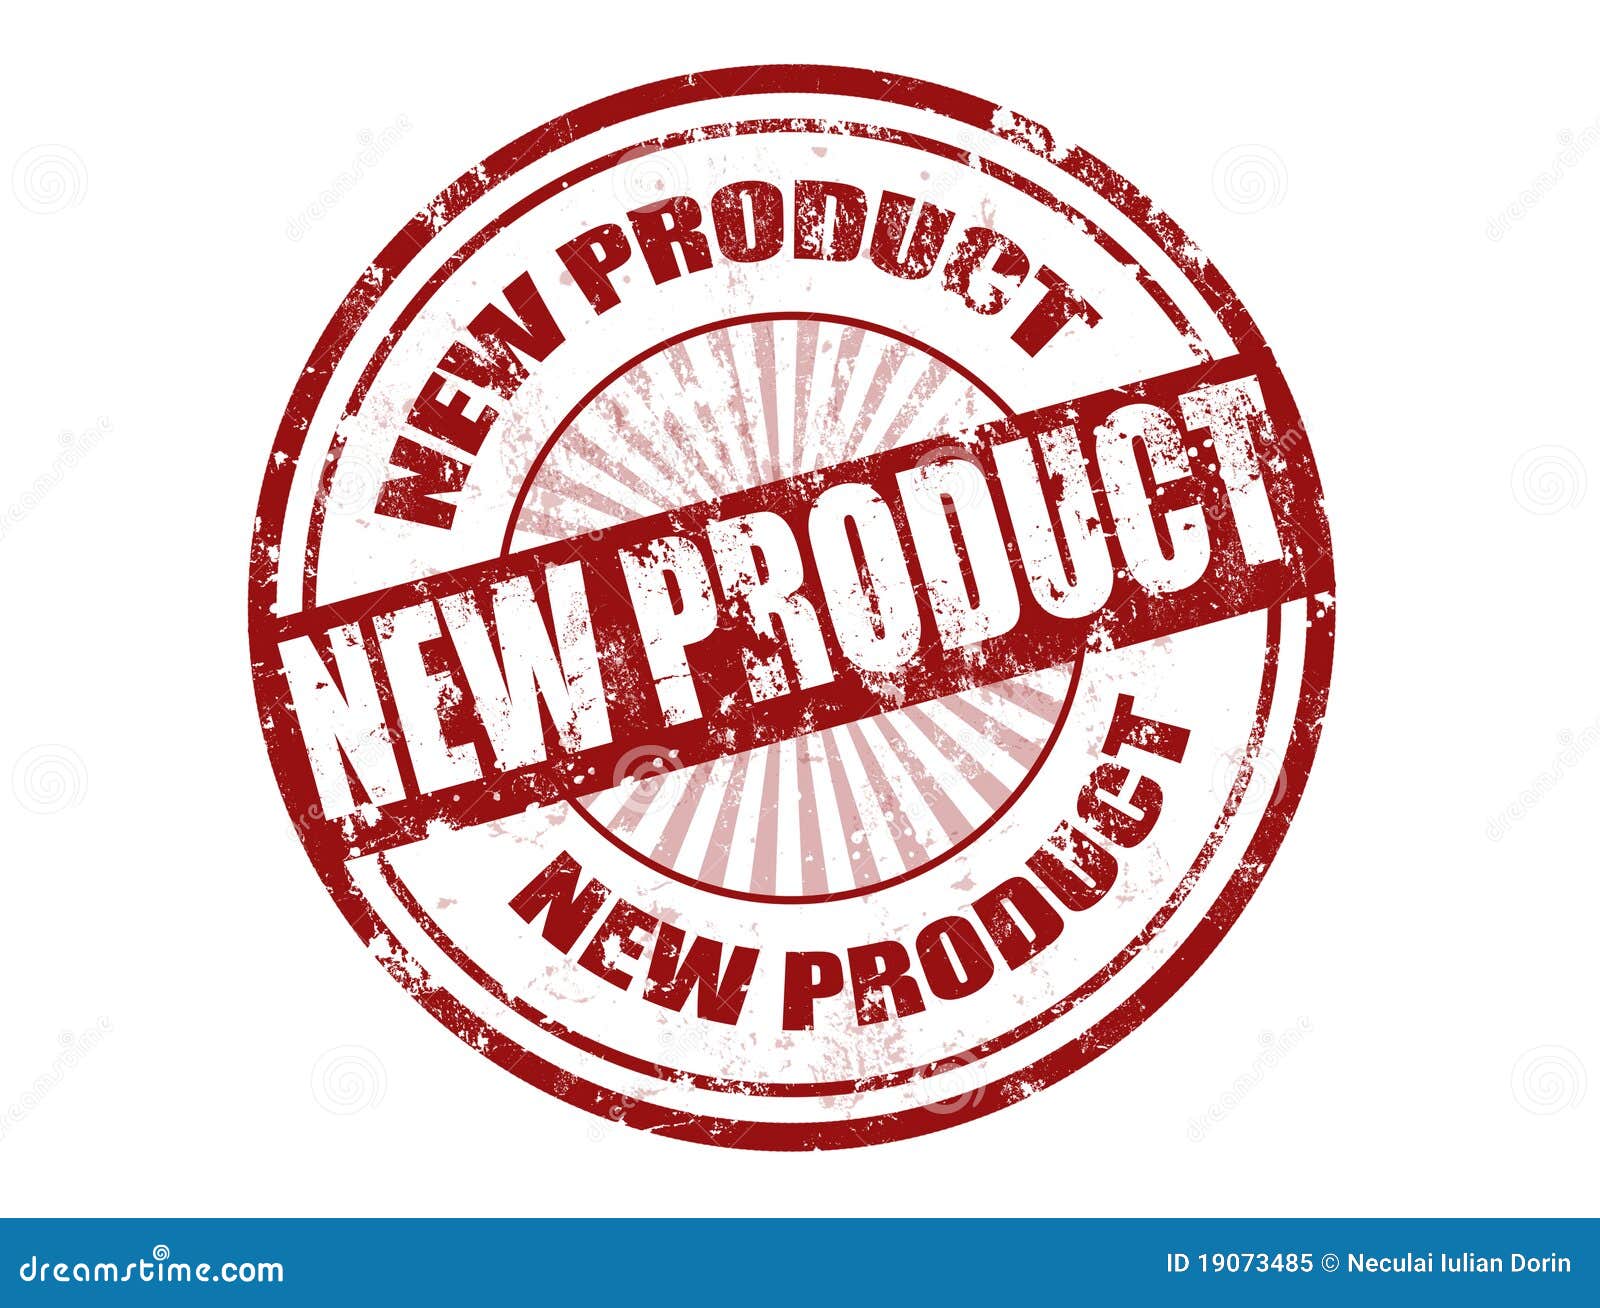 clipart new product - photo #12